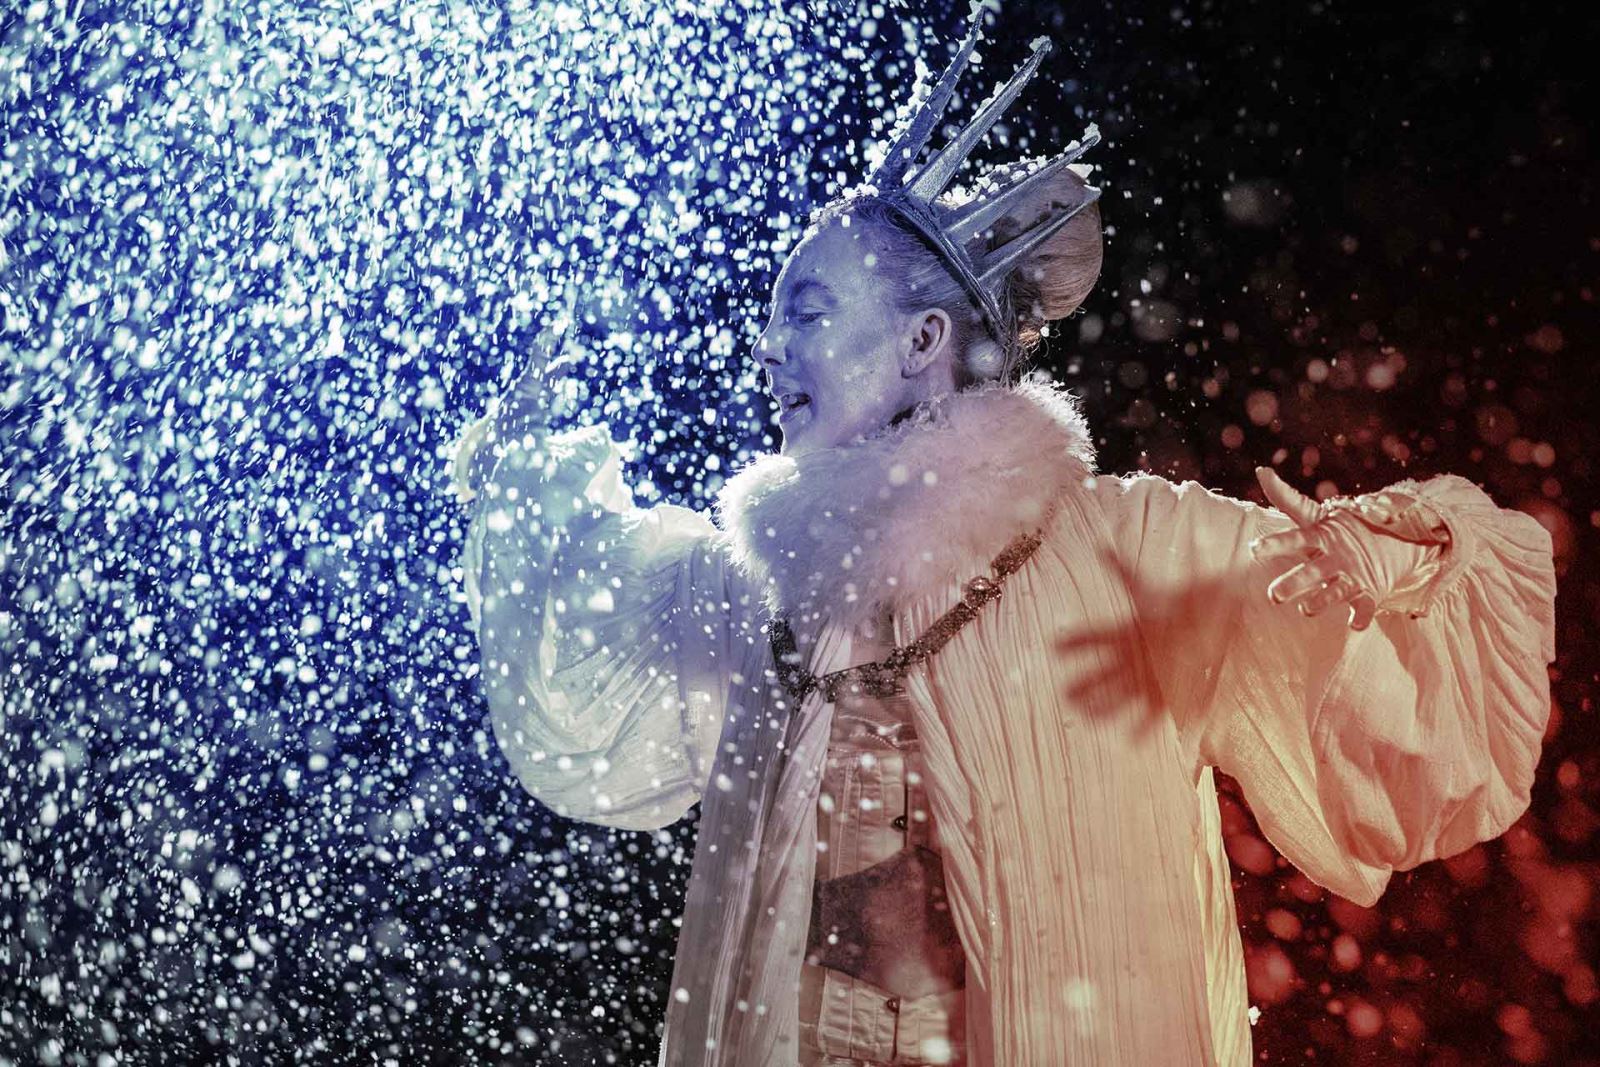 The Snow Queen. Credit Storyhouse